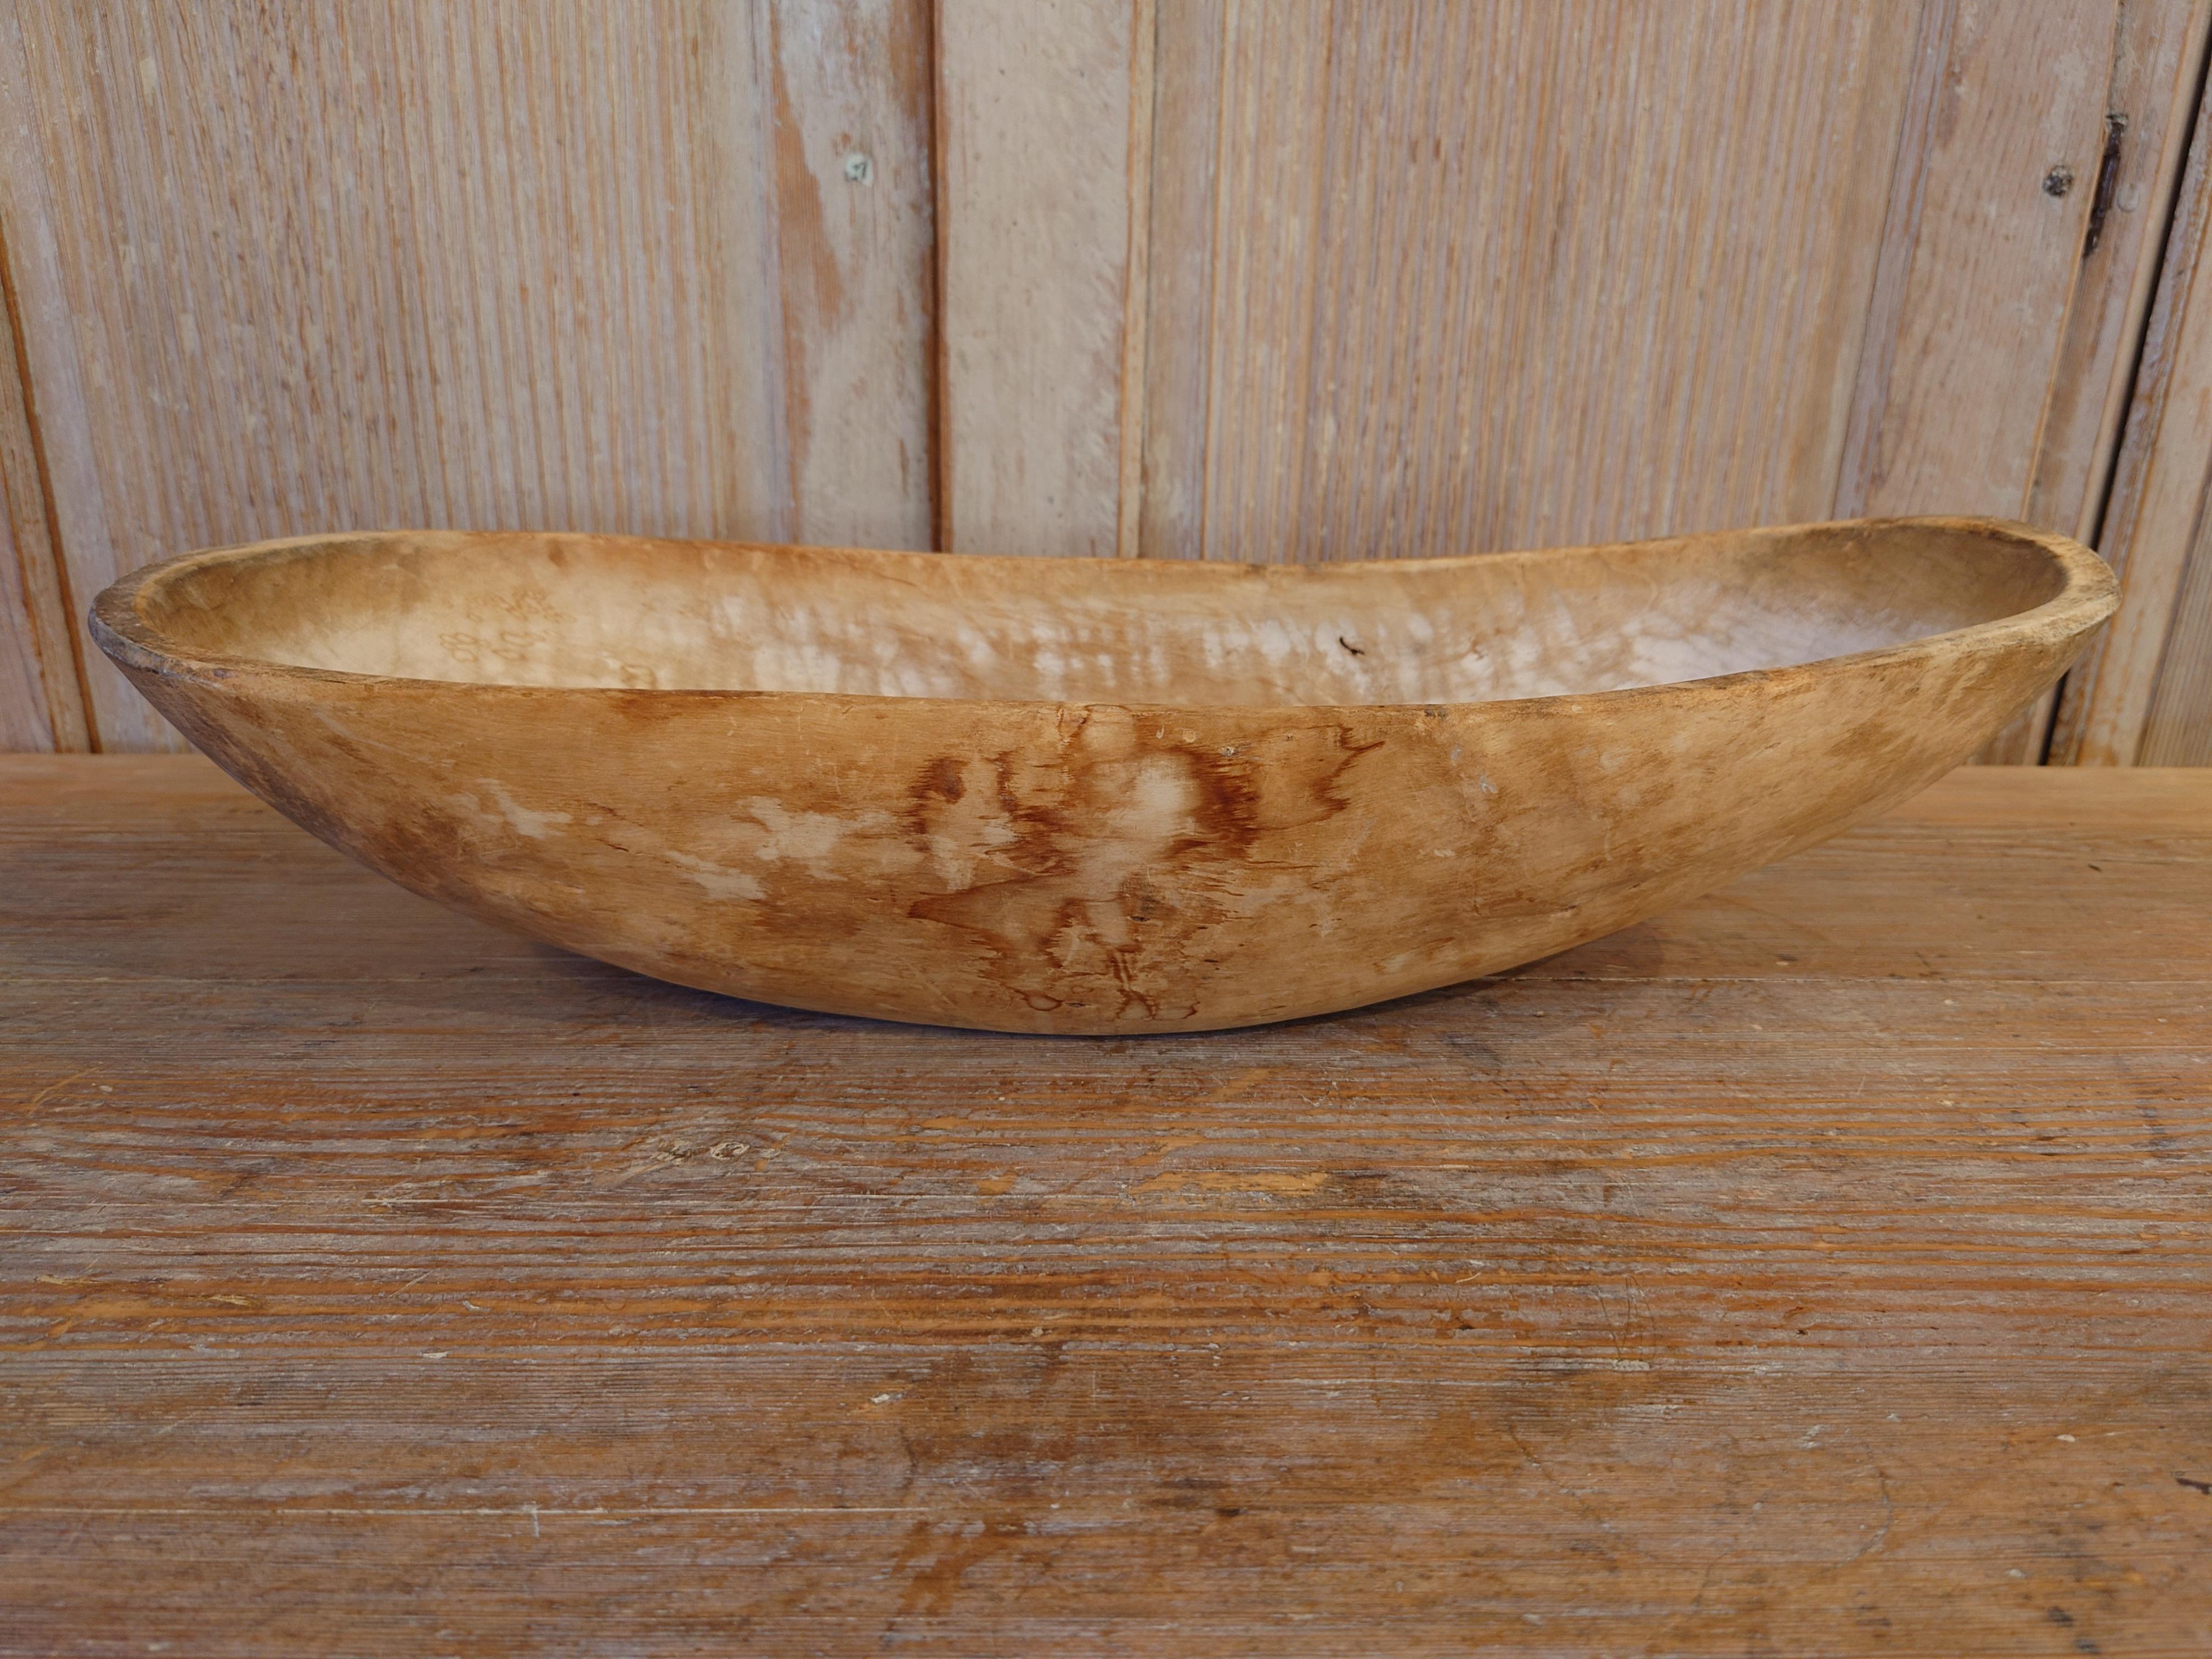 18th century Swedish Antique Rustic wooden bowl with nice patina from Dalarna Northern Sweden.
The bowl has an oval shape.
The surfaces are naturally patinated due tue age
You can see the use of time.
A truly remarkable piece, that would make a